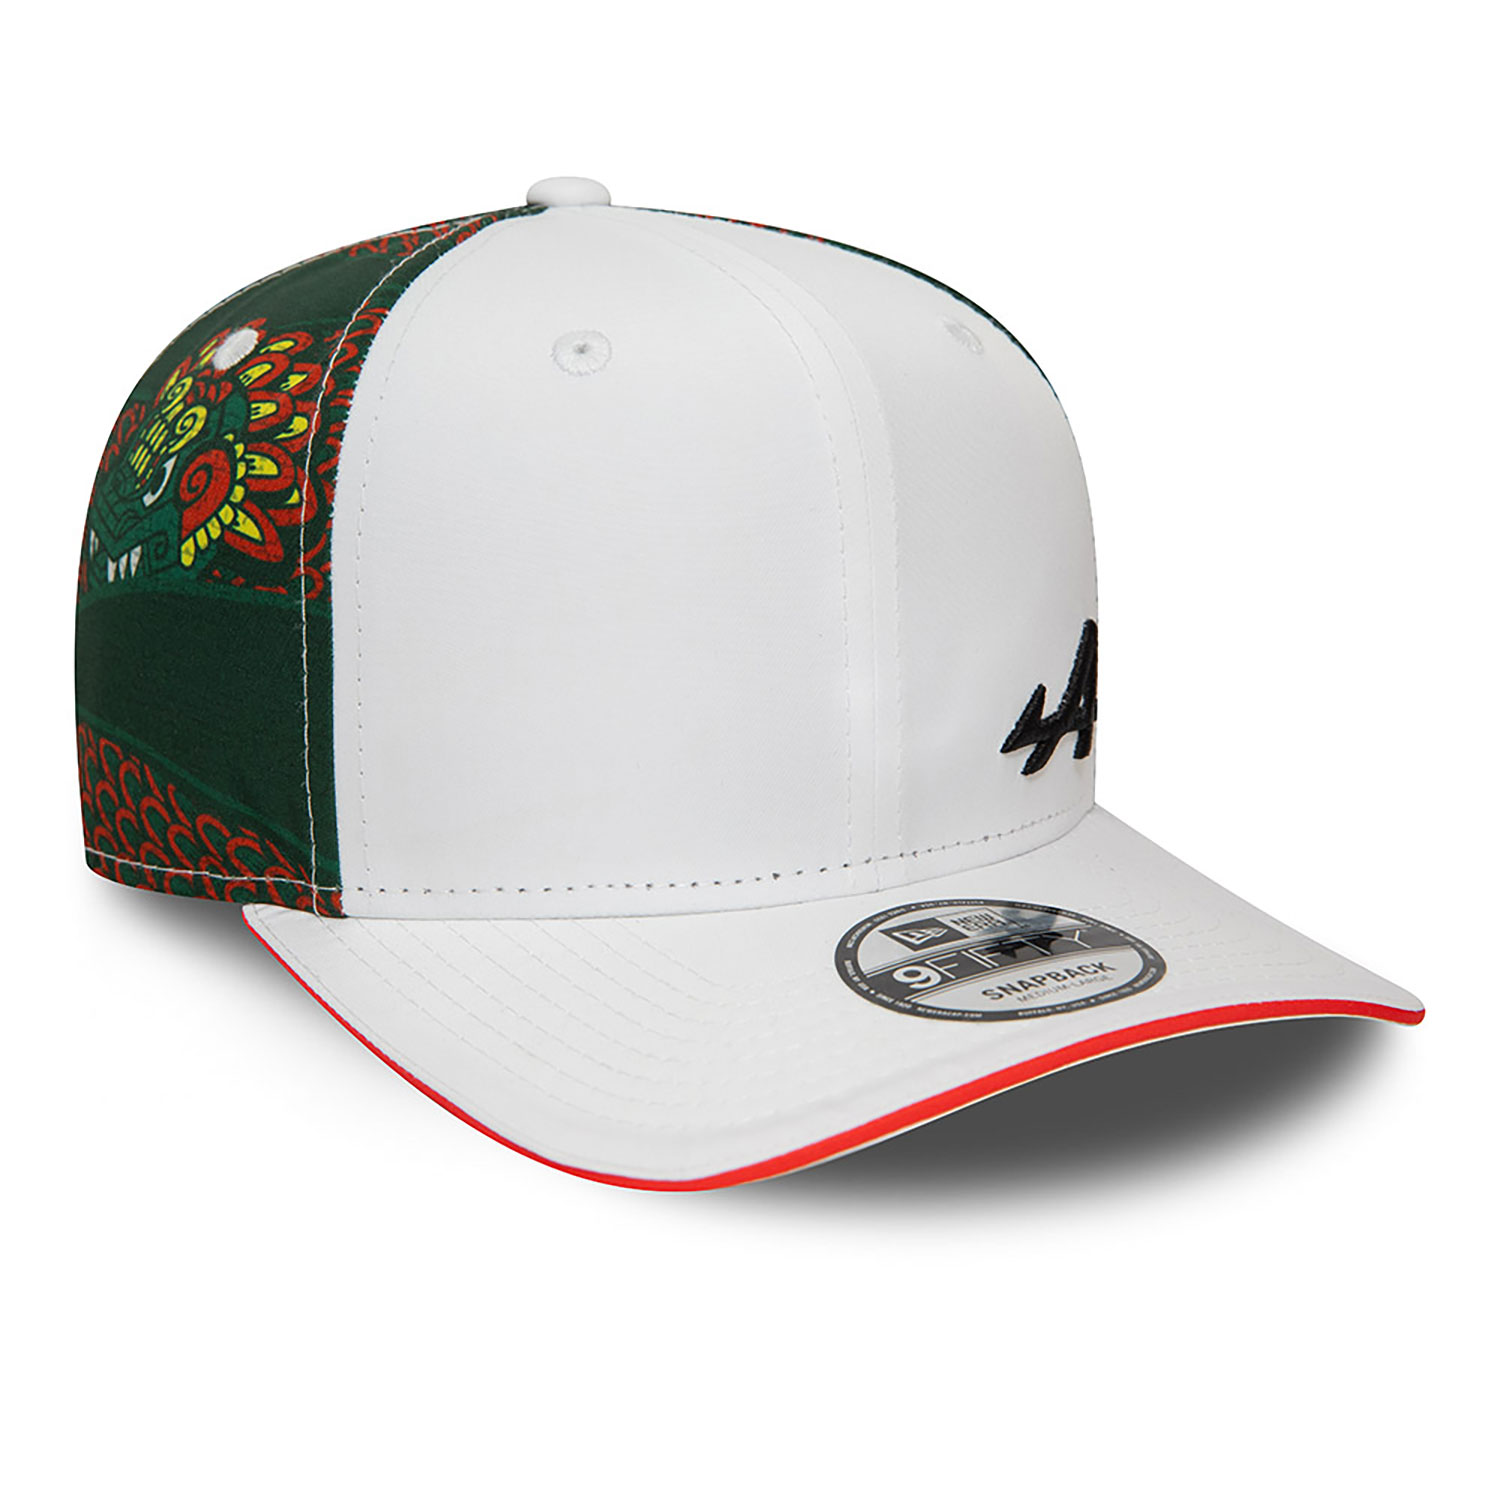 Alpine Mexico Race Special White 9FIFTY Snapback Cap